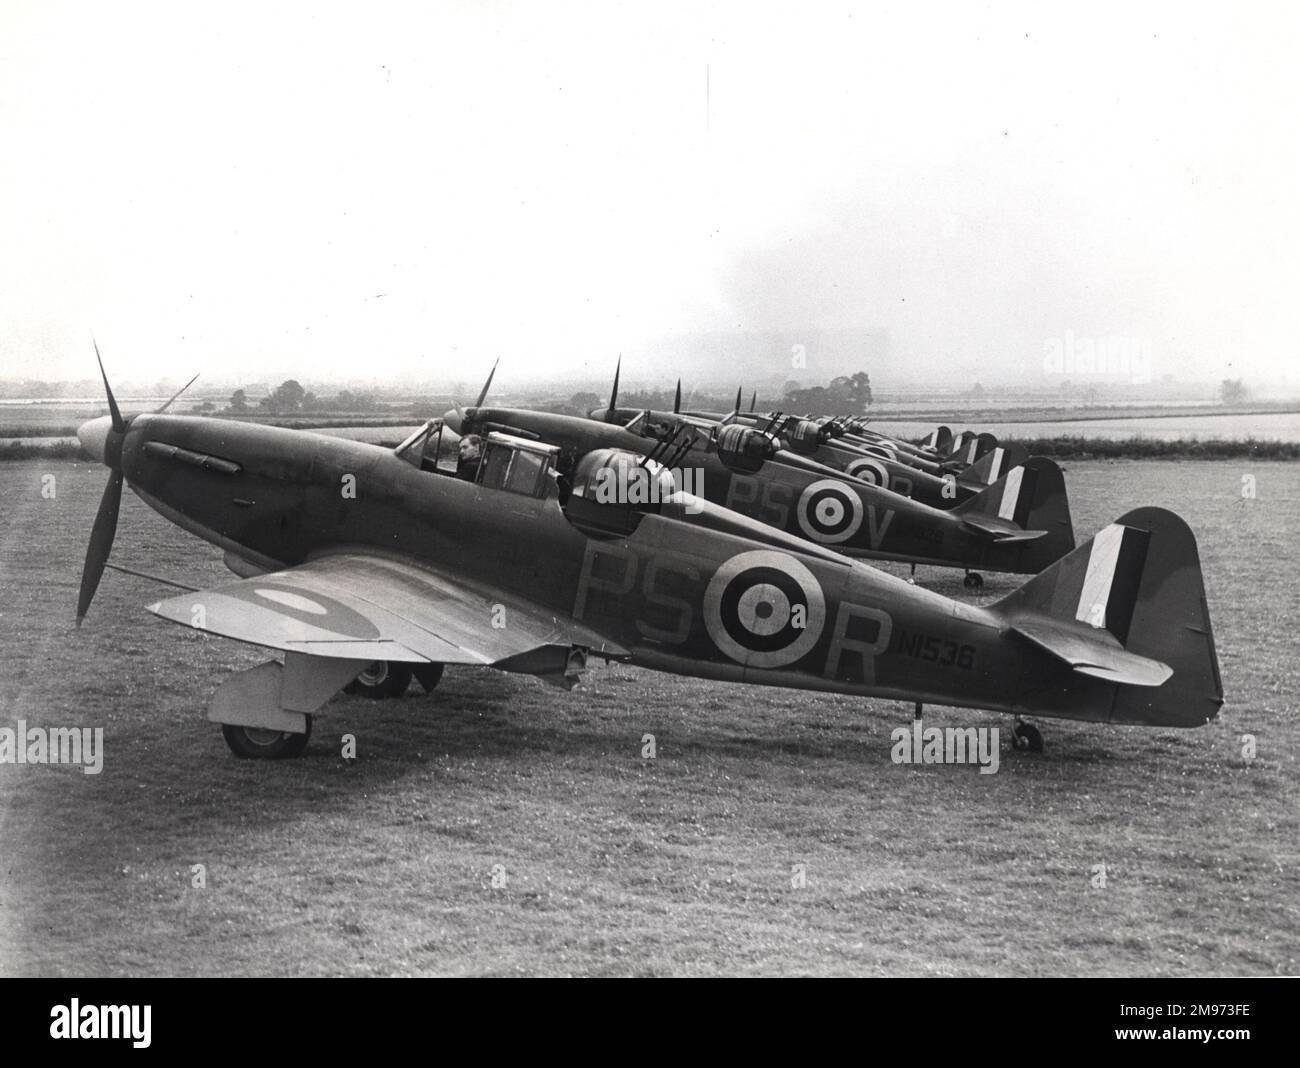 Boulton Paul Defiants of 264 Squadron at Kirton-in-Lindsey during the summer of 1940. Including NI536. Stock Photo